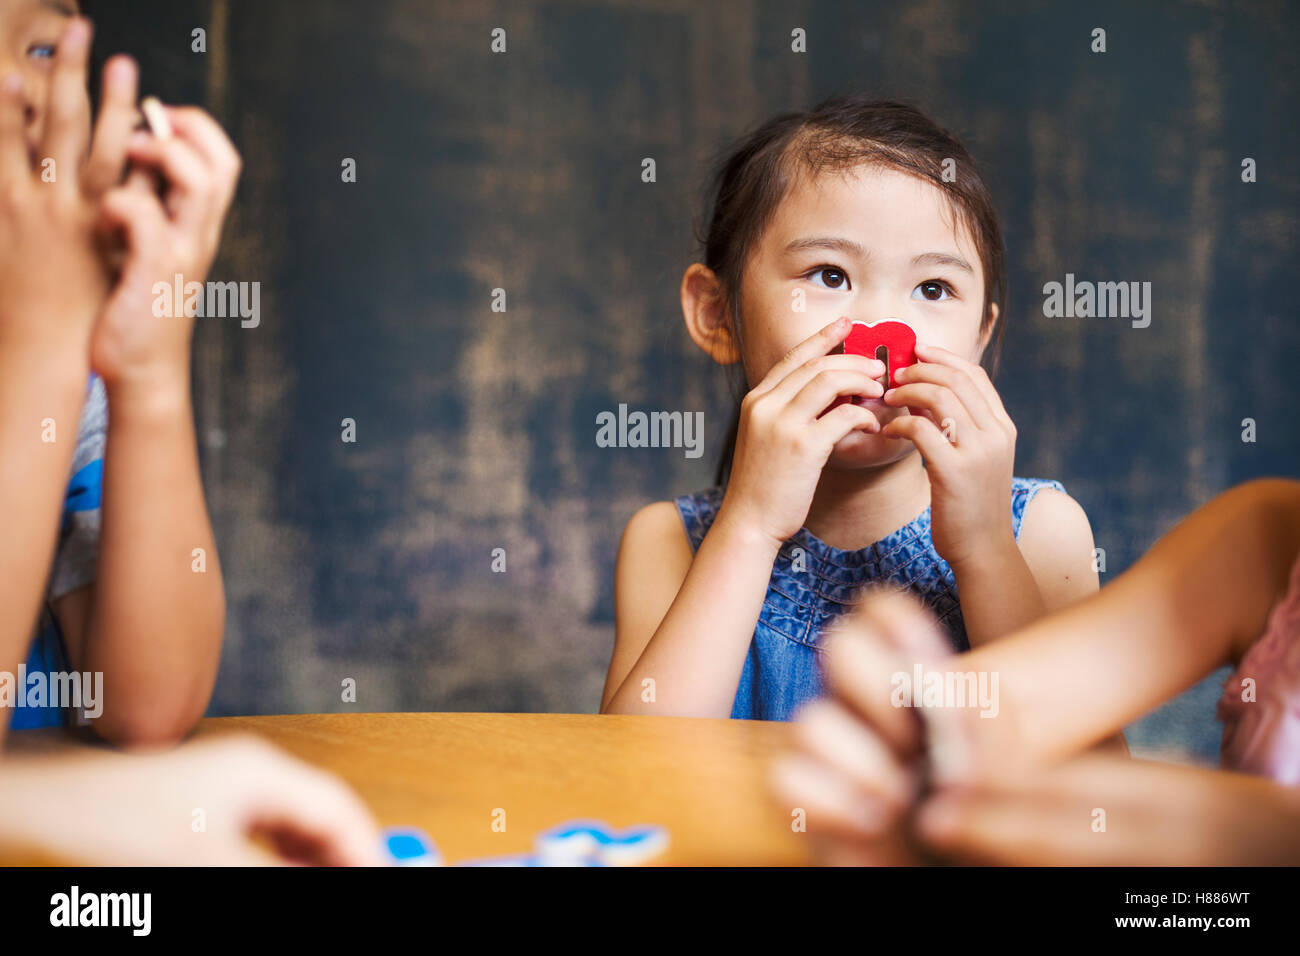 A group of children in school. Two boys and two girls holding up alphabet letters. Stock Photo